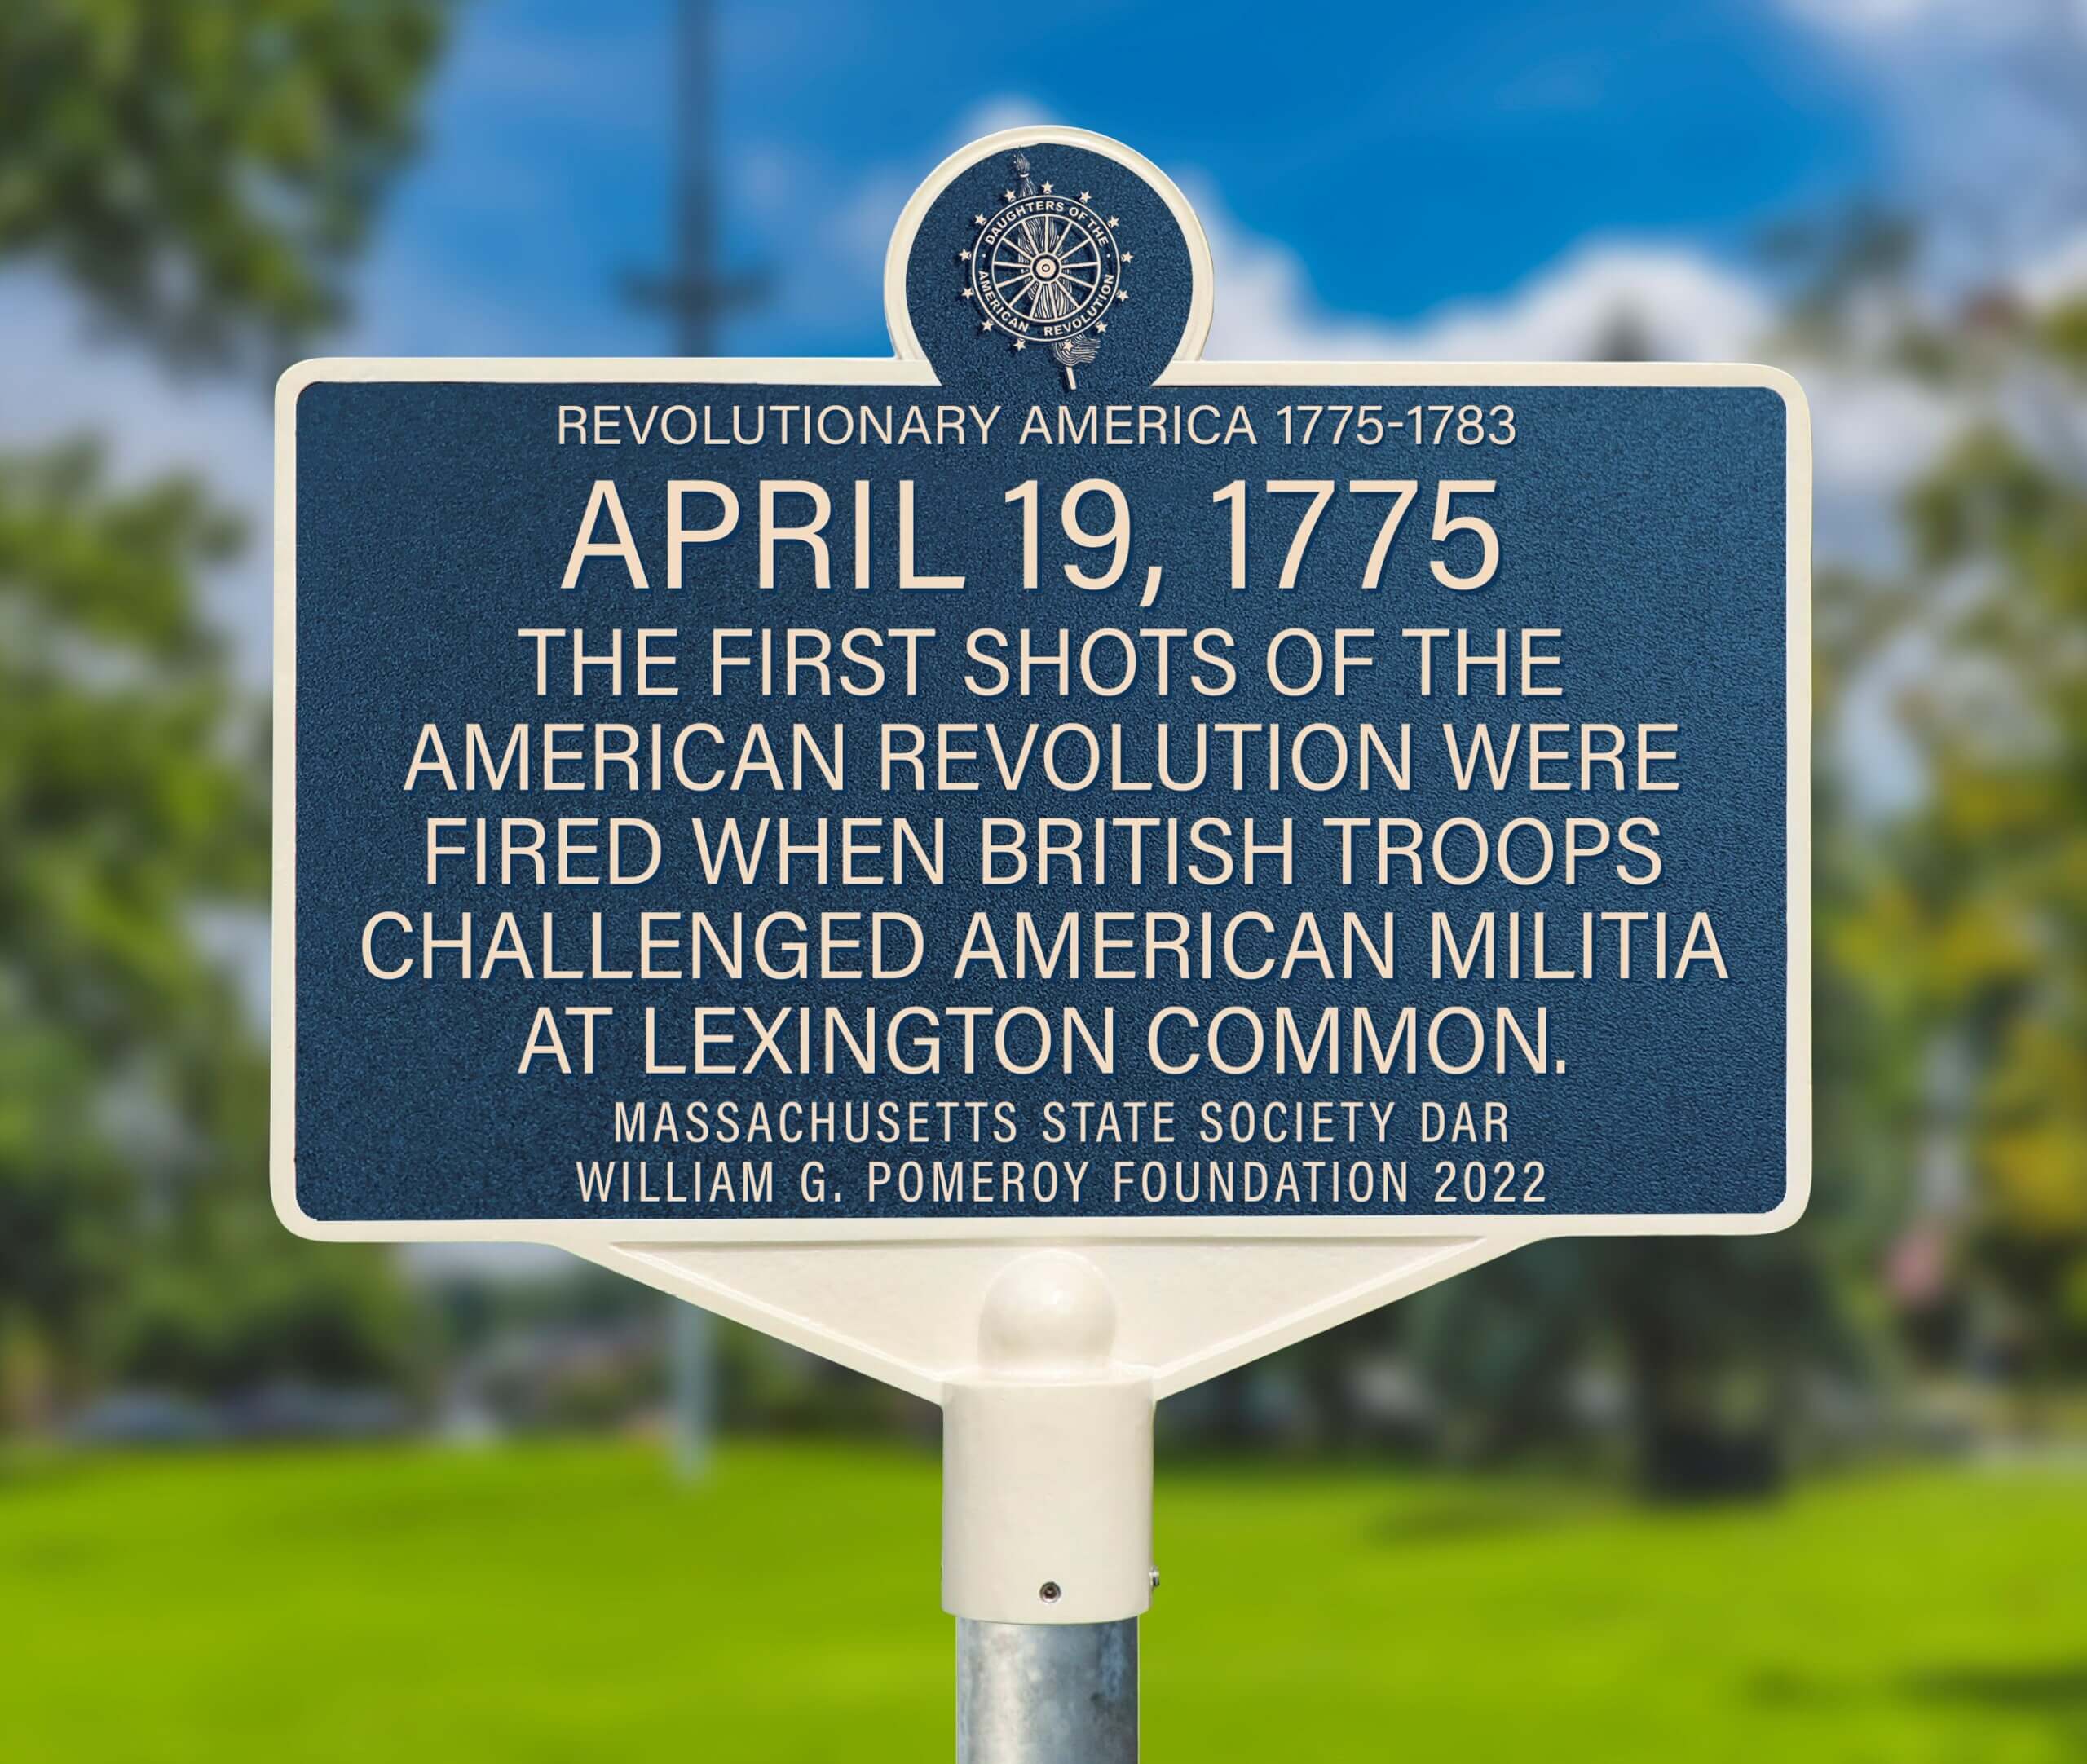 Demarcating Territory: Historical Markers in the United States